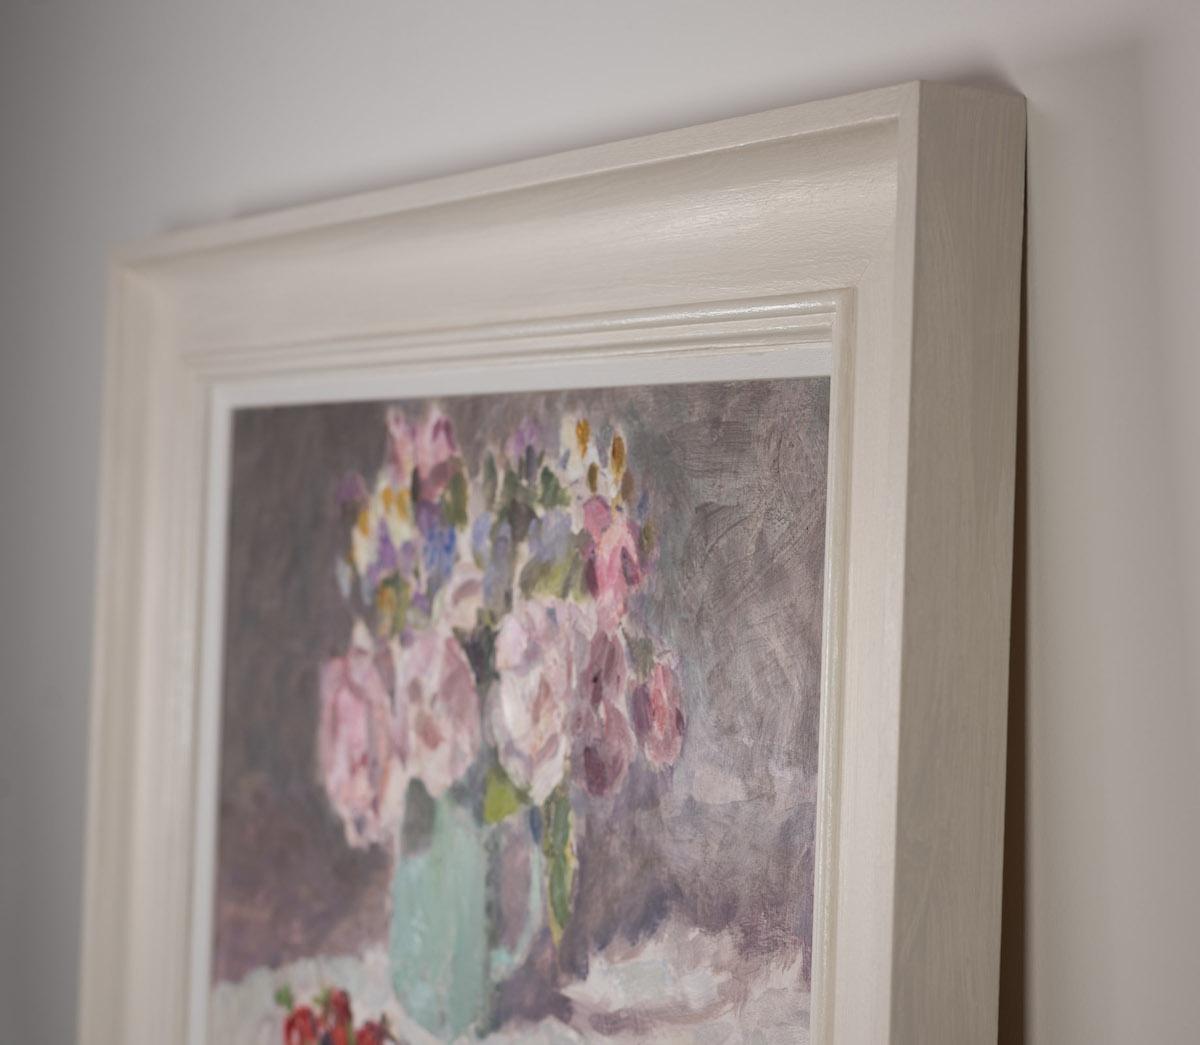 Painted from life, flowers and strawberries grown by the artist. Oil on Board. Wooden Frame, painted. Signed and labeled on the back of the picture, back of the frame and lower right of painting. Ready to hang.

Lynne Cartlidge artist offers